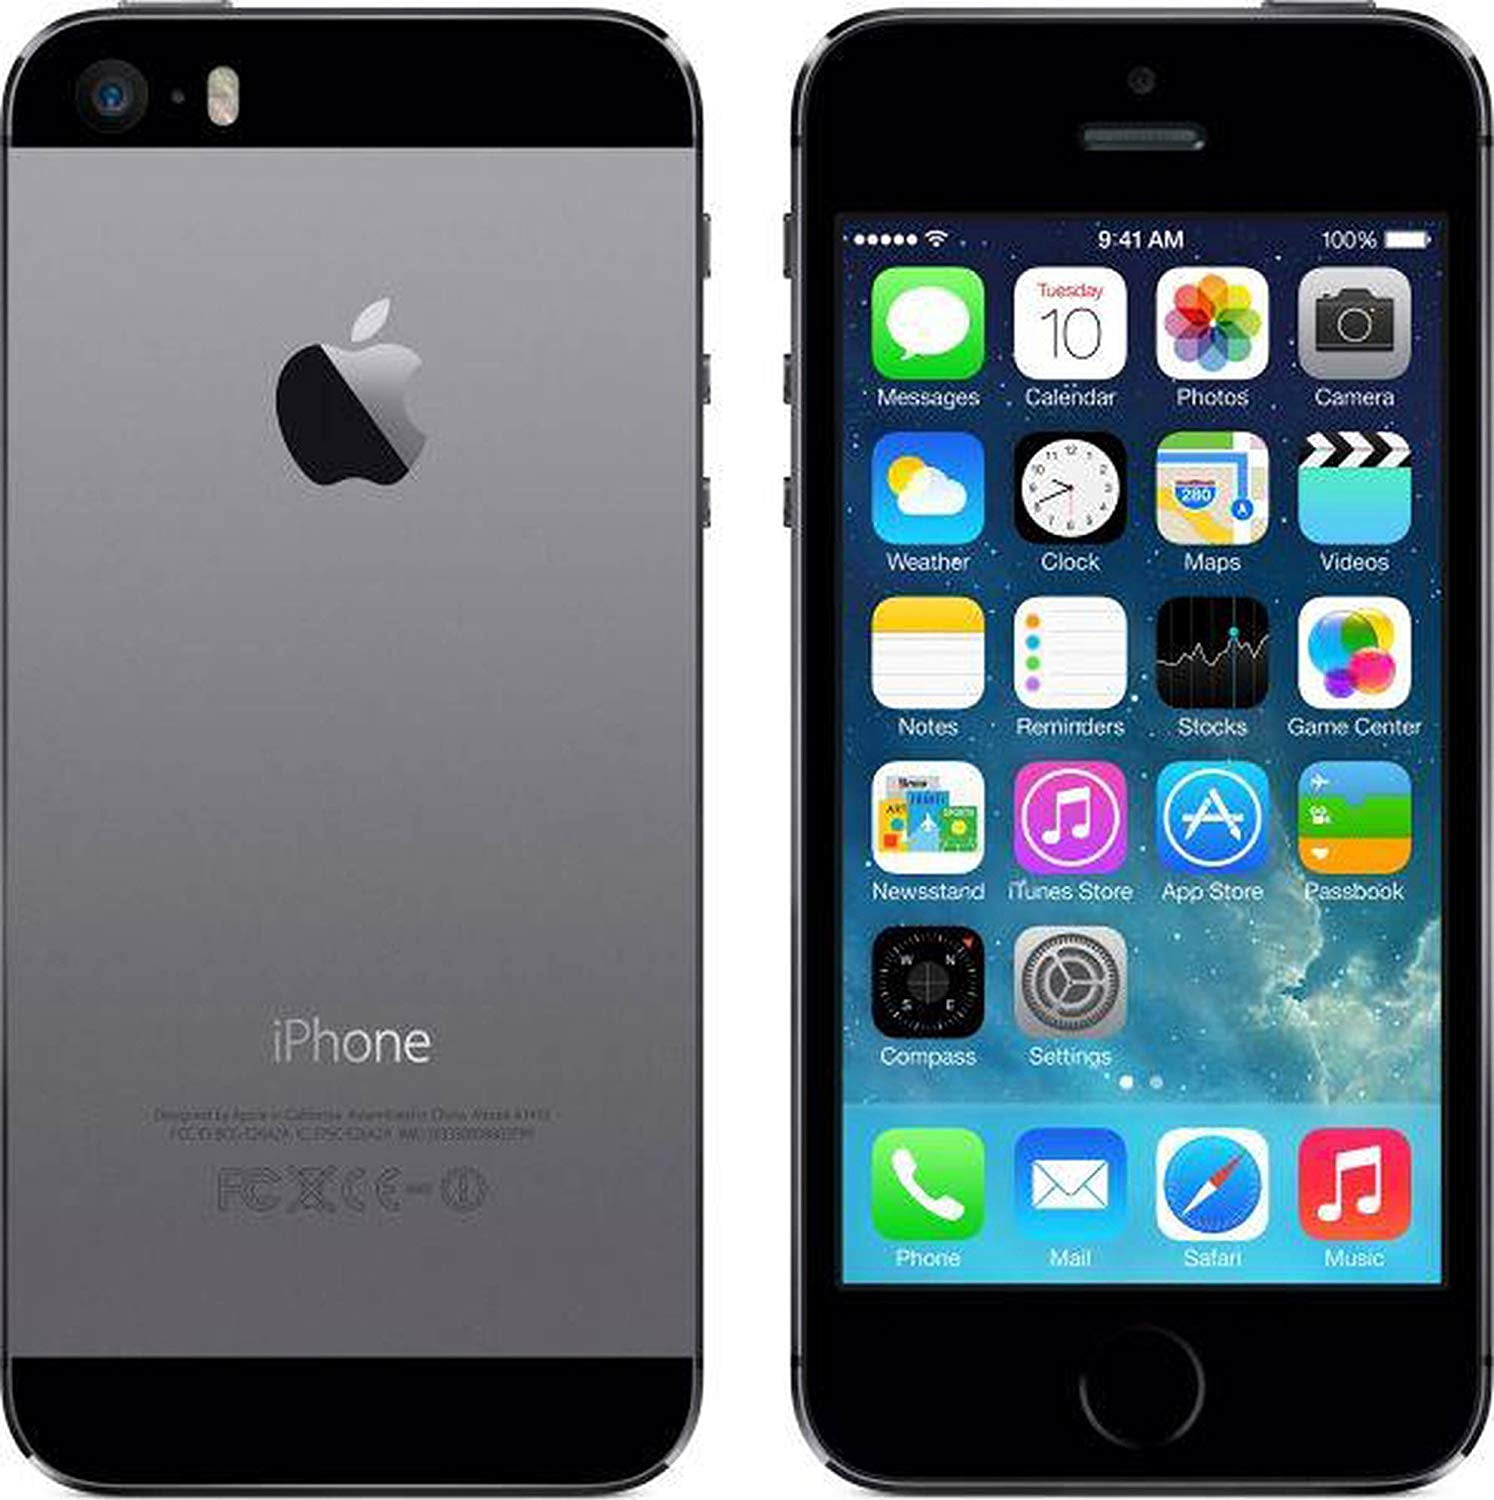 Pre-Owned iPhone 5s 16GB Space Gray (Unlocked) (Good)